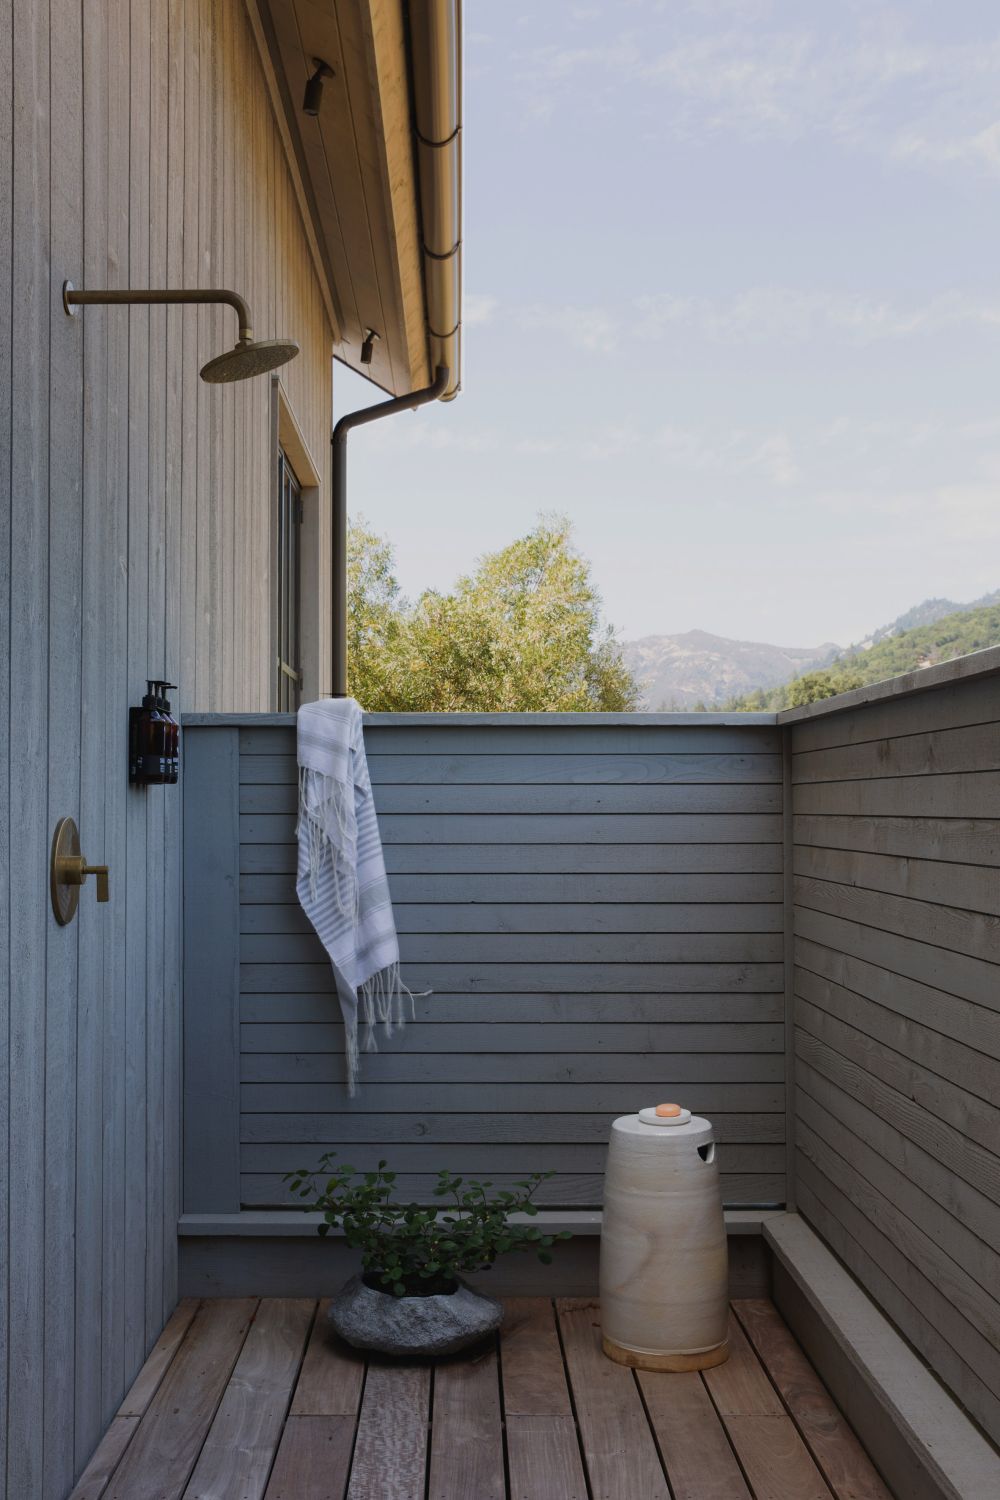 An outdoor shower complements the poolhouse, making the most of this wonderful location